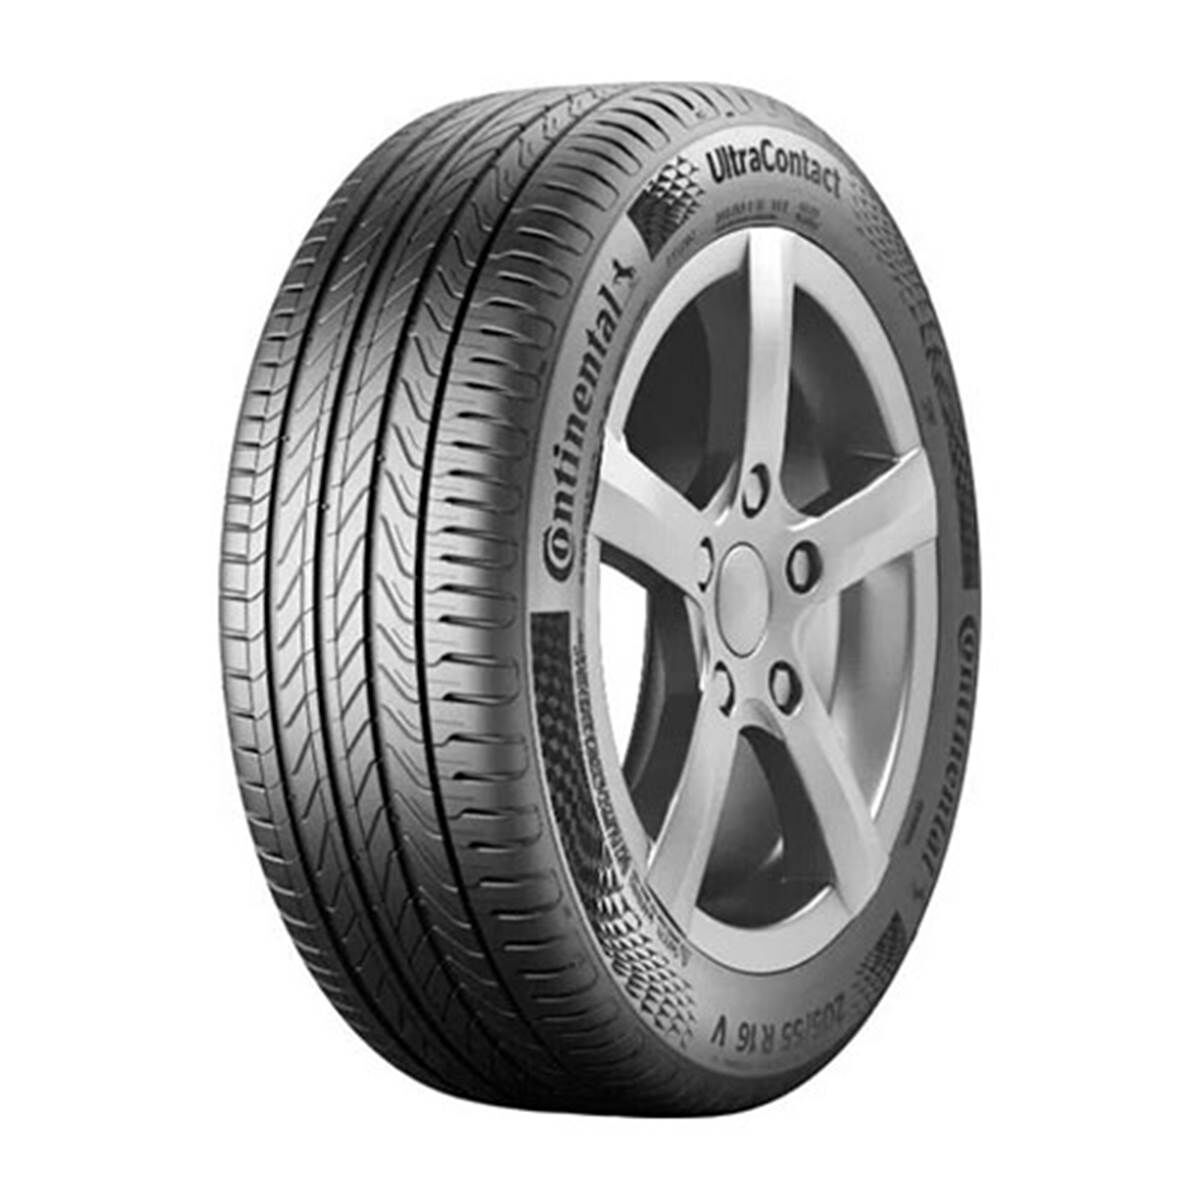 Continental Neumático  Ultracontact 175/80R14 88T